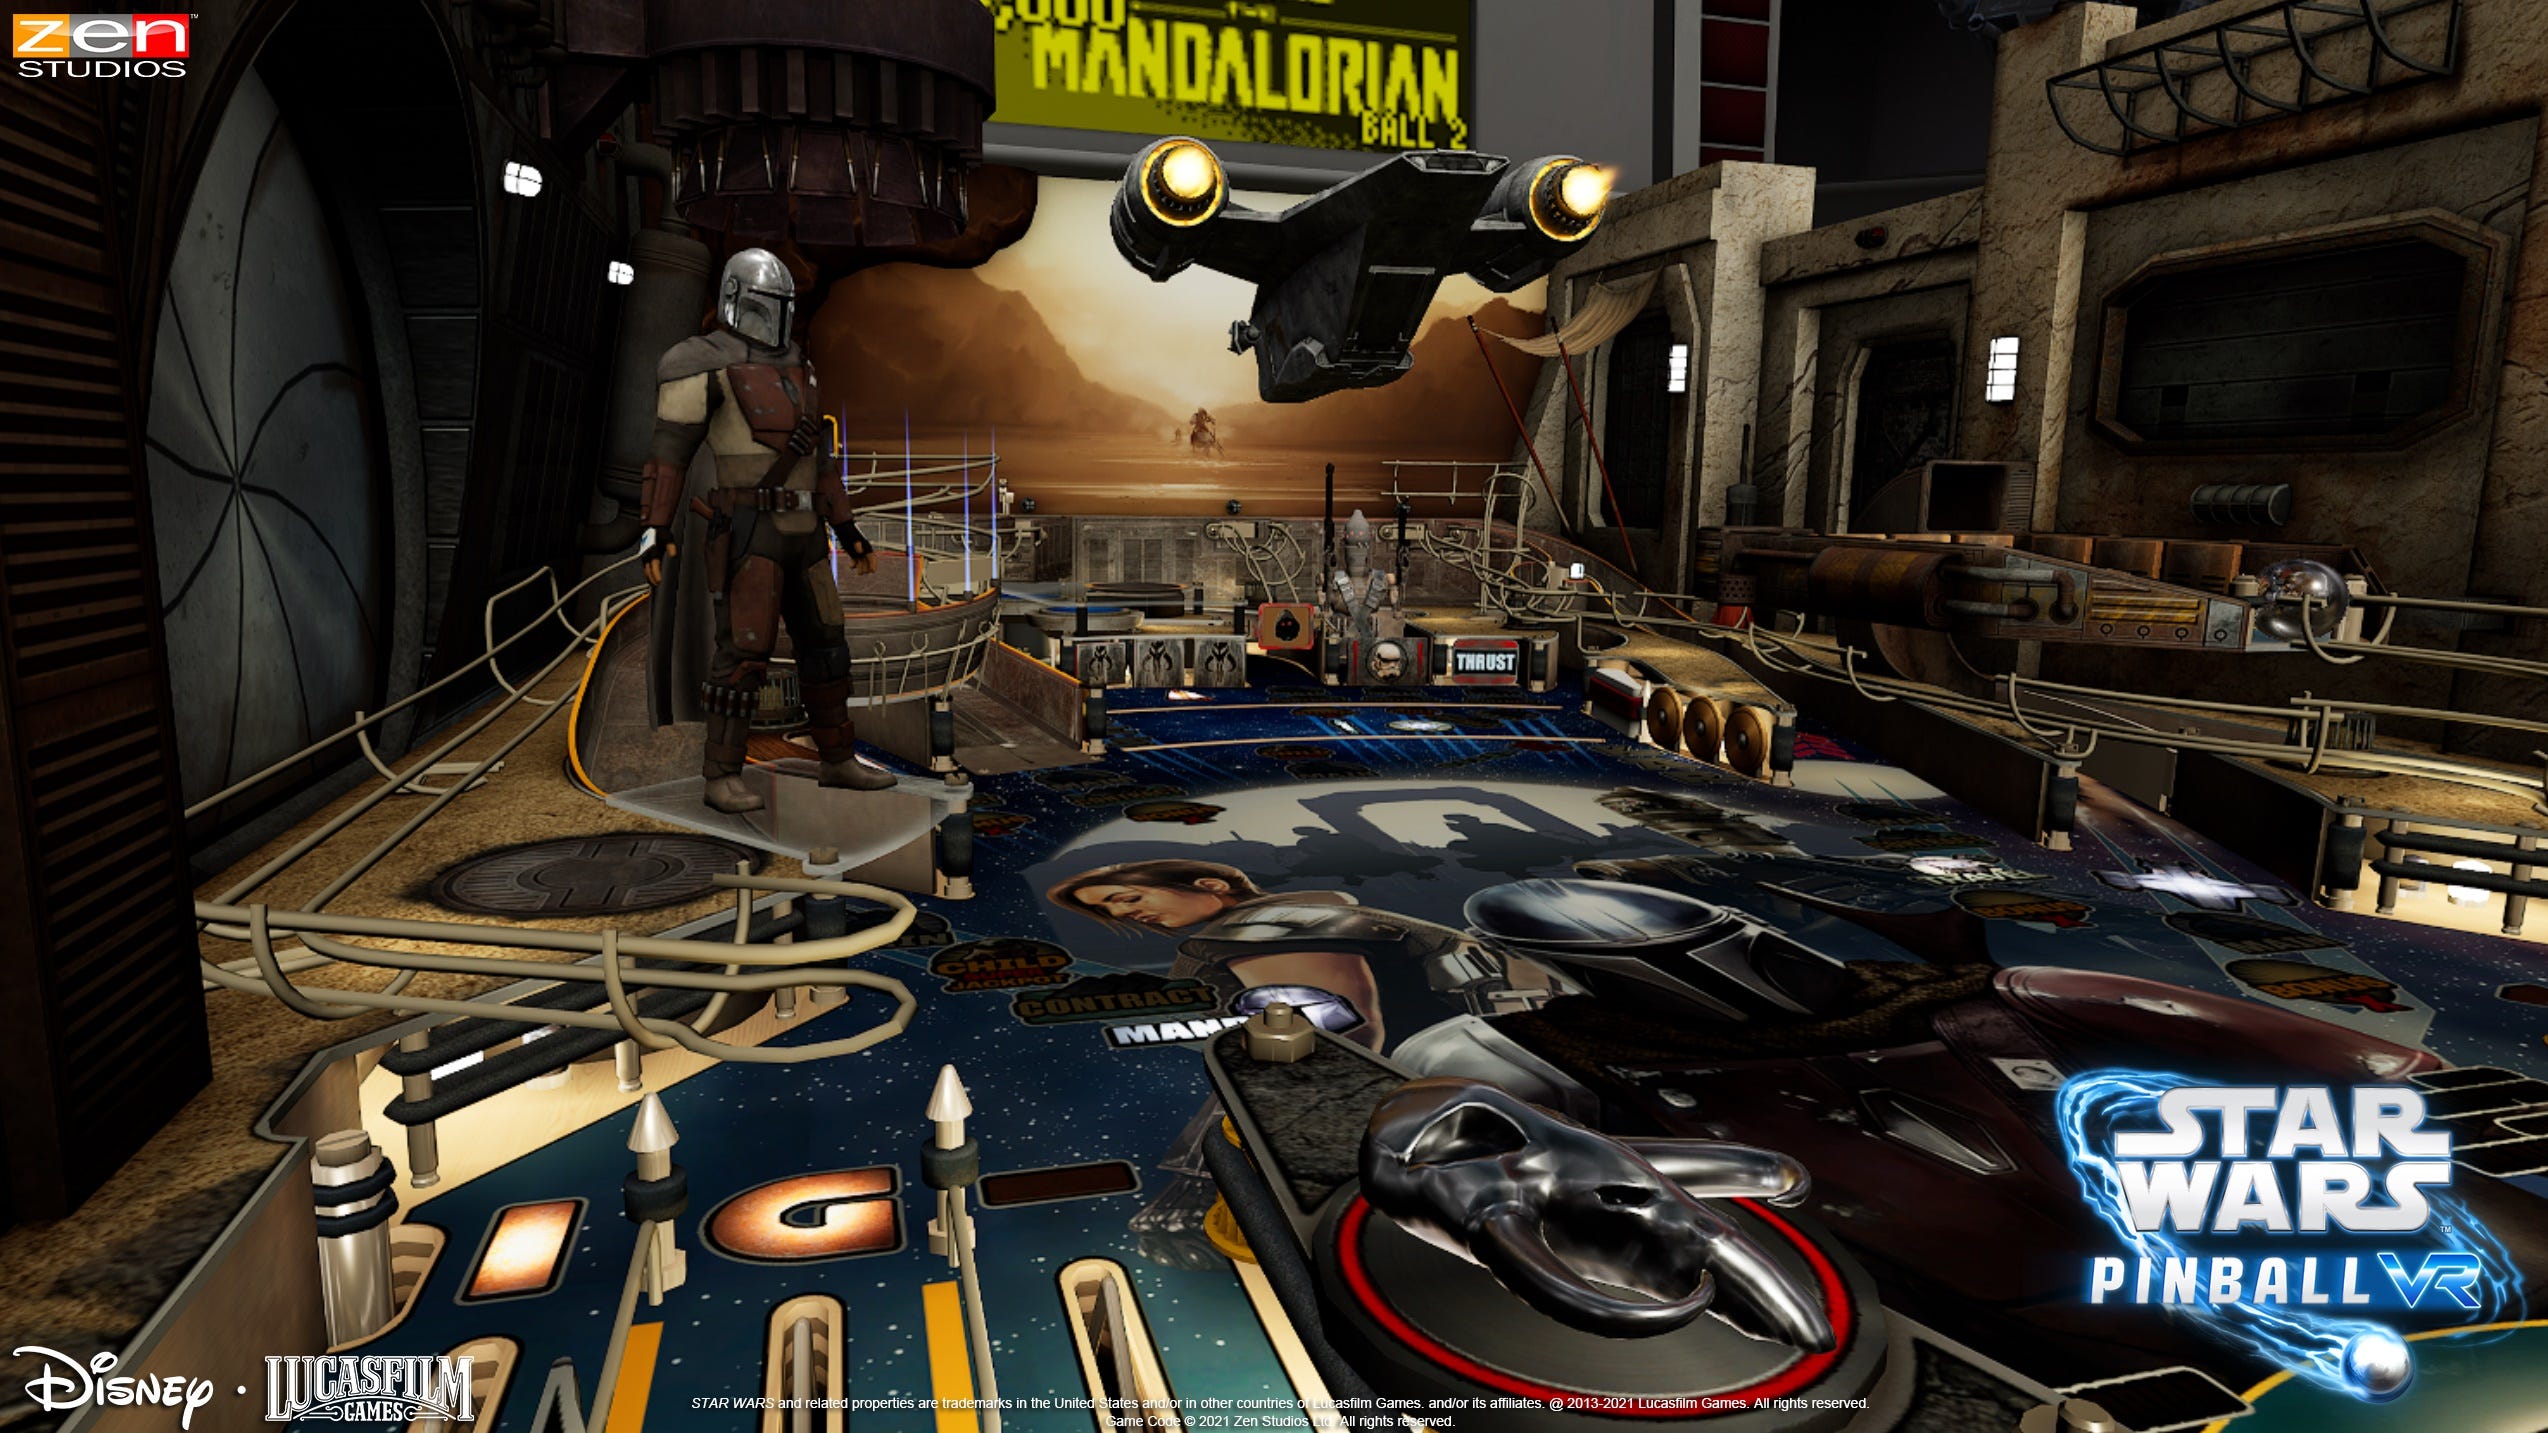 "Star Wars Pinball VR" features eight different pinball tables, including one based on "The Mandalorian."